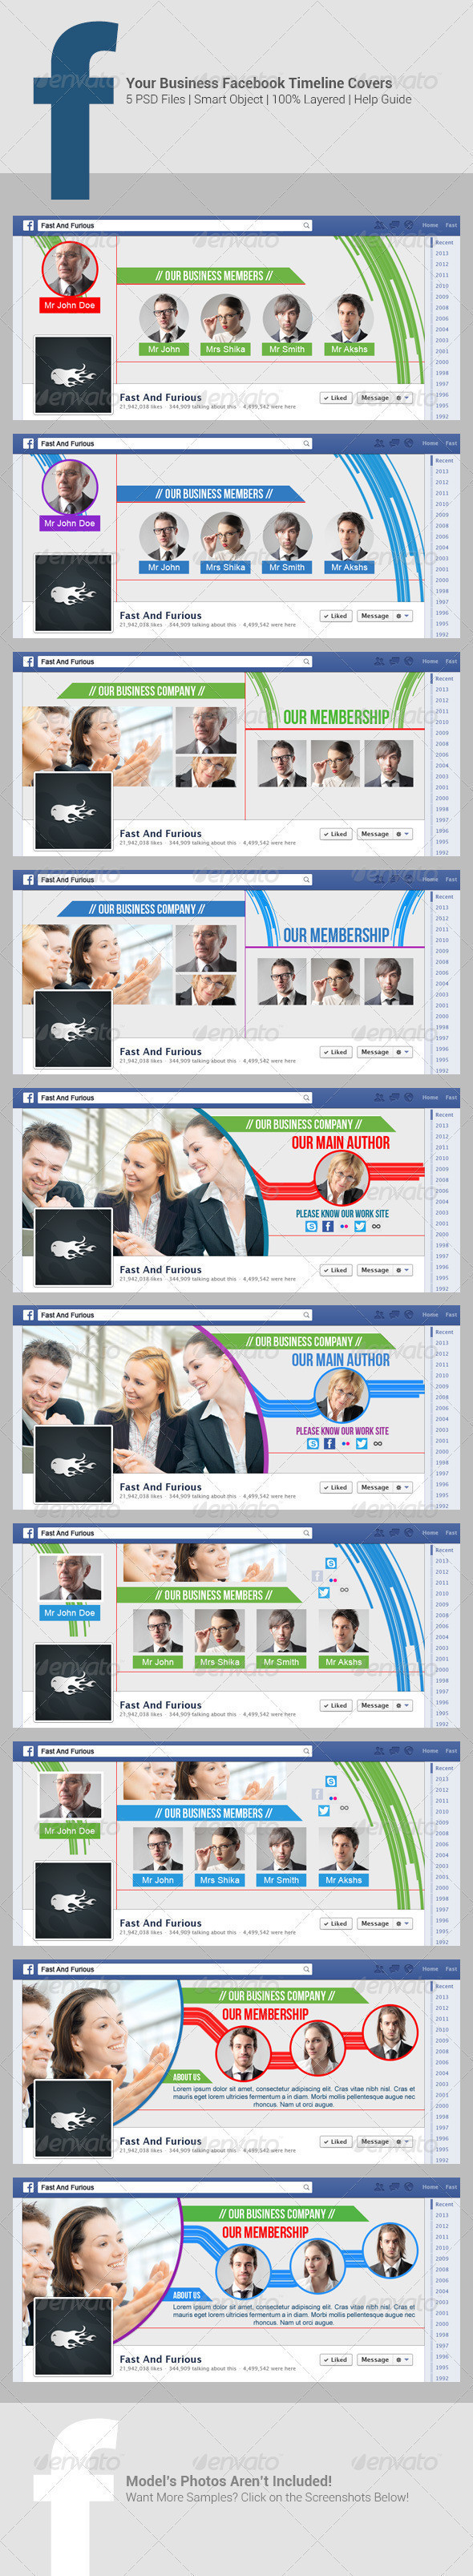 Your business facebook timeline cover template